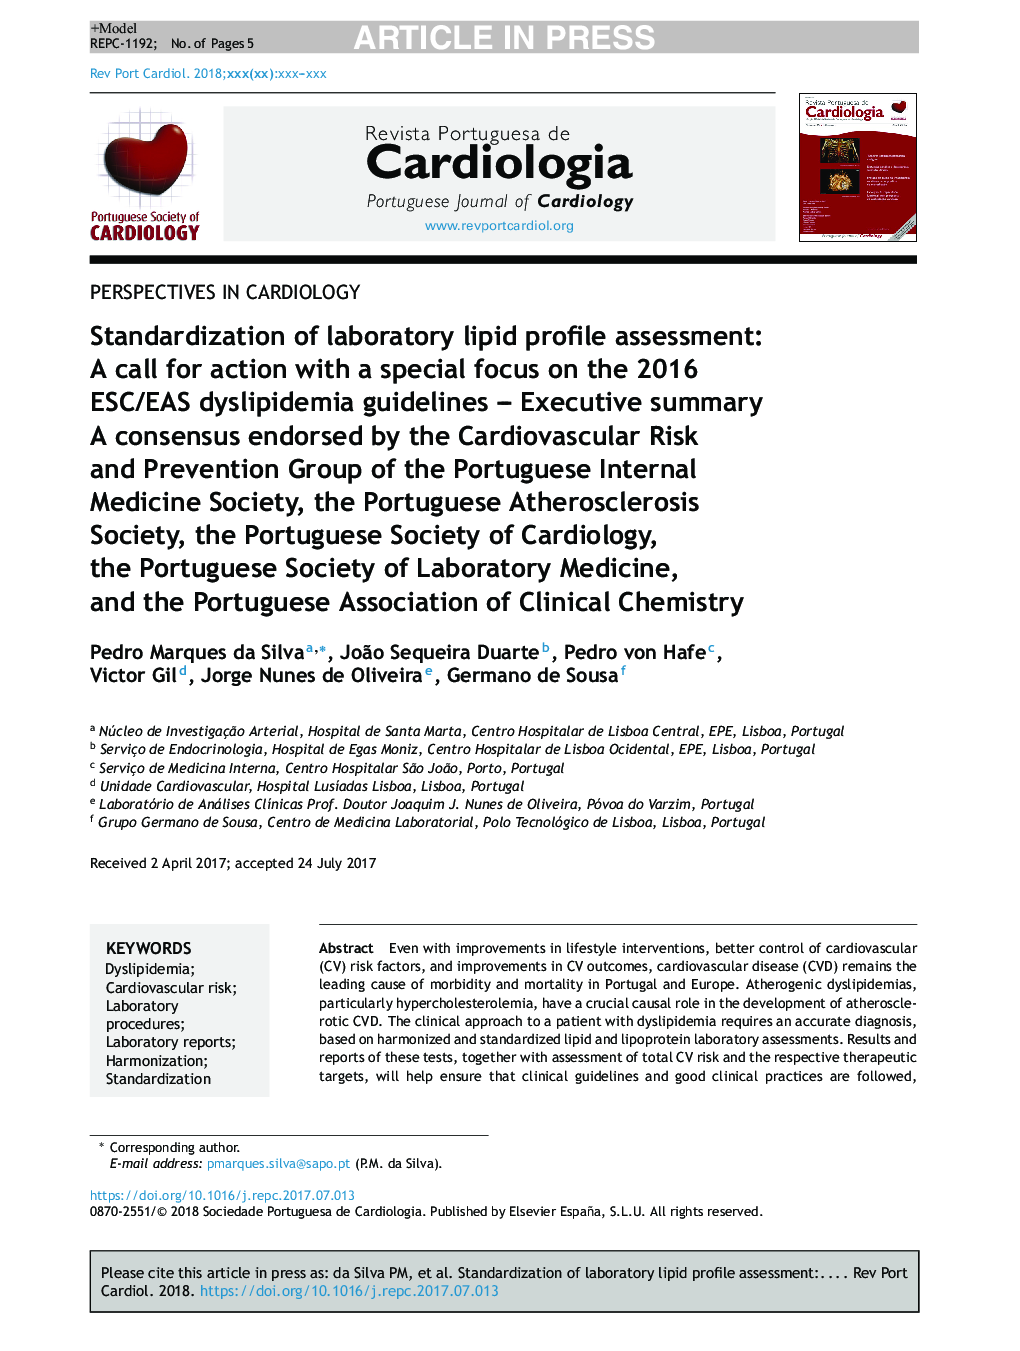 Standardization of laboratory lipid profile assessment: A call for action with a special focus on the 2016 ESC/EAS dyslipidemia guidelines - Executive summary